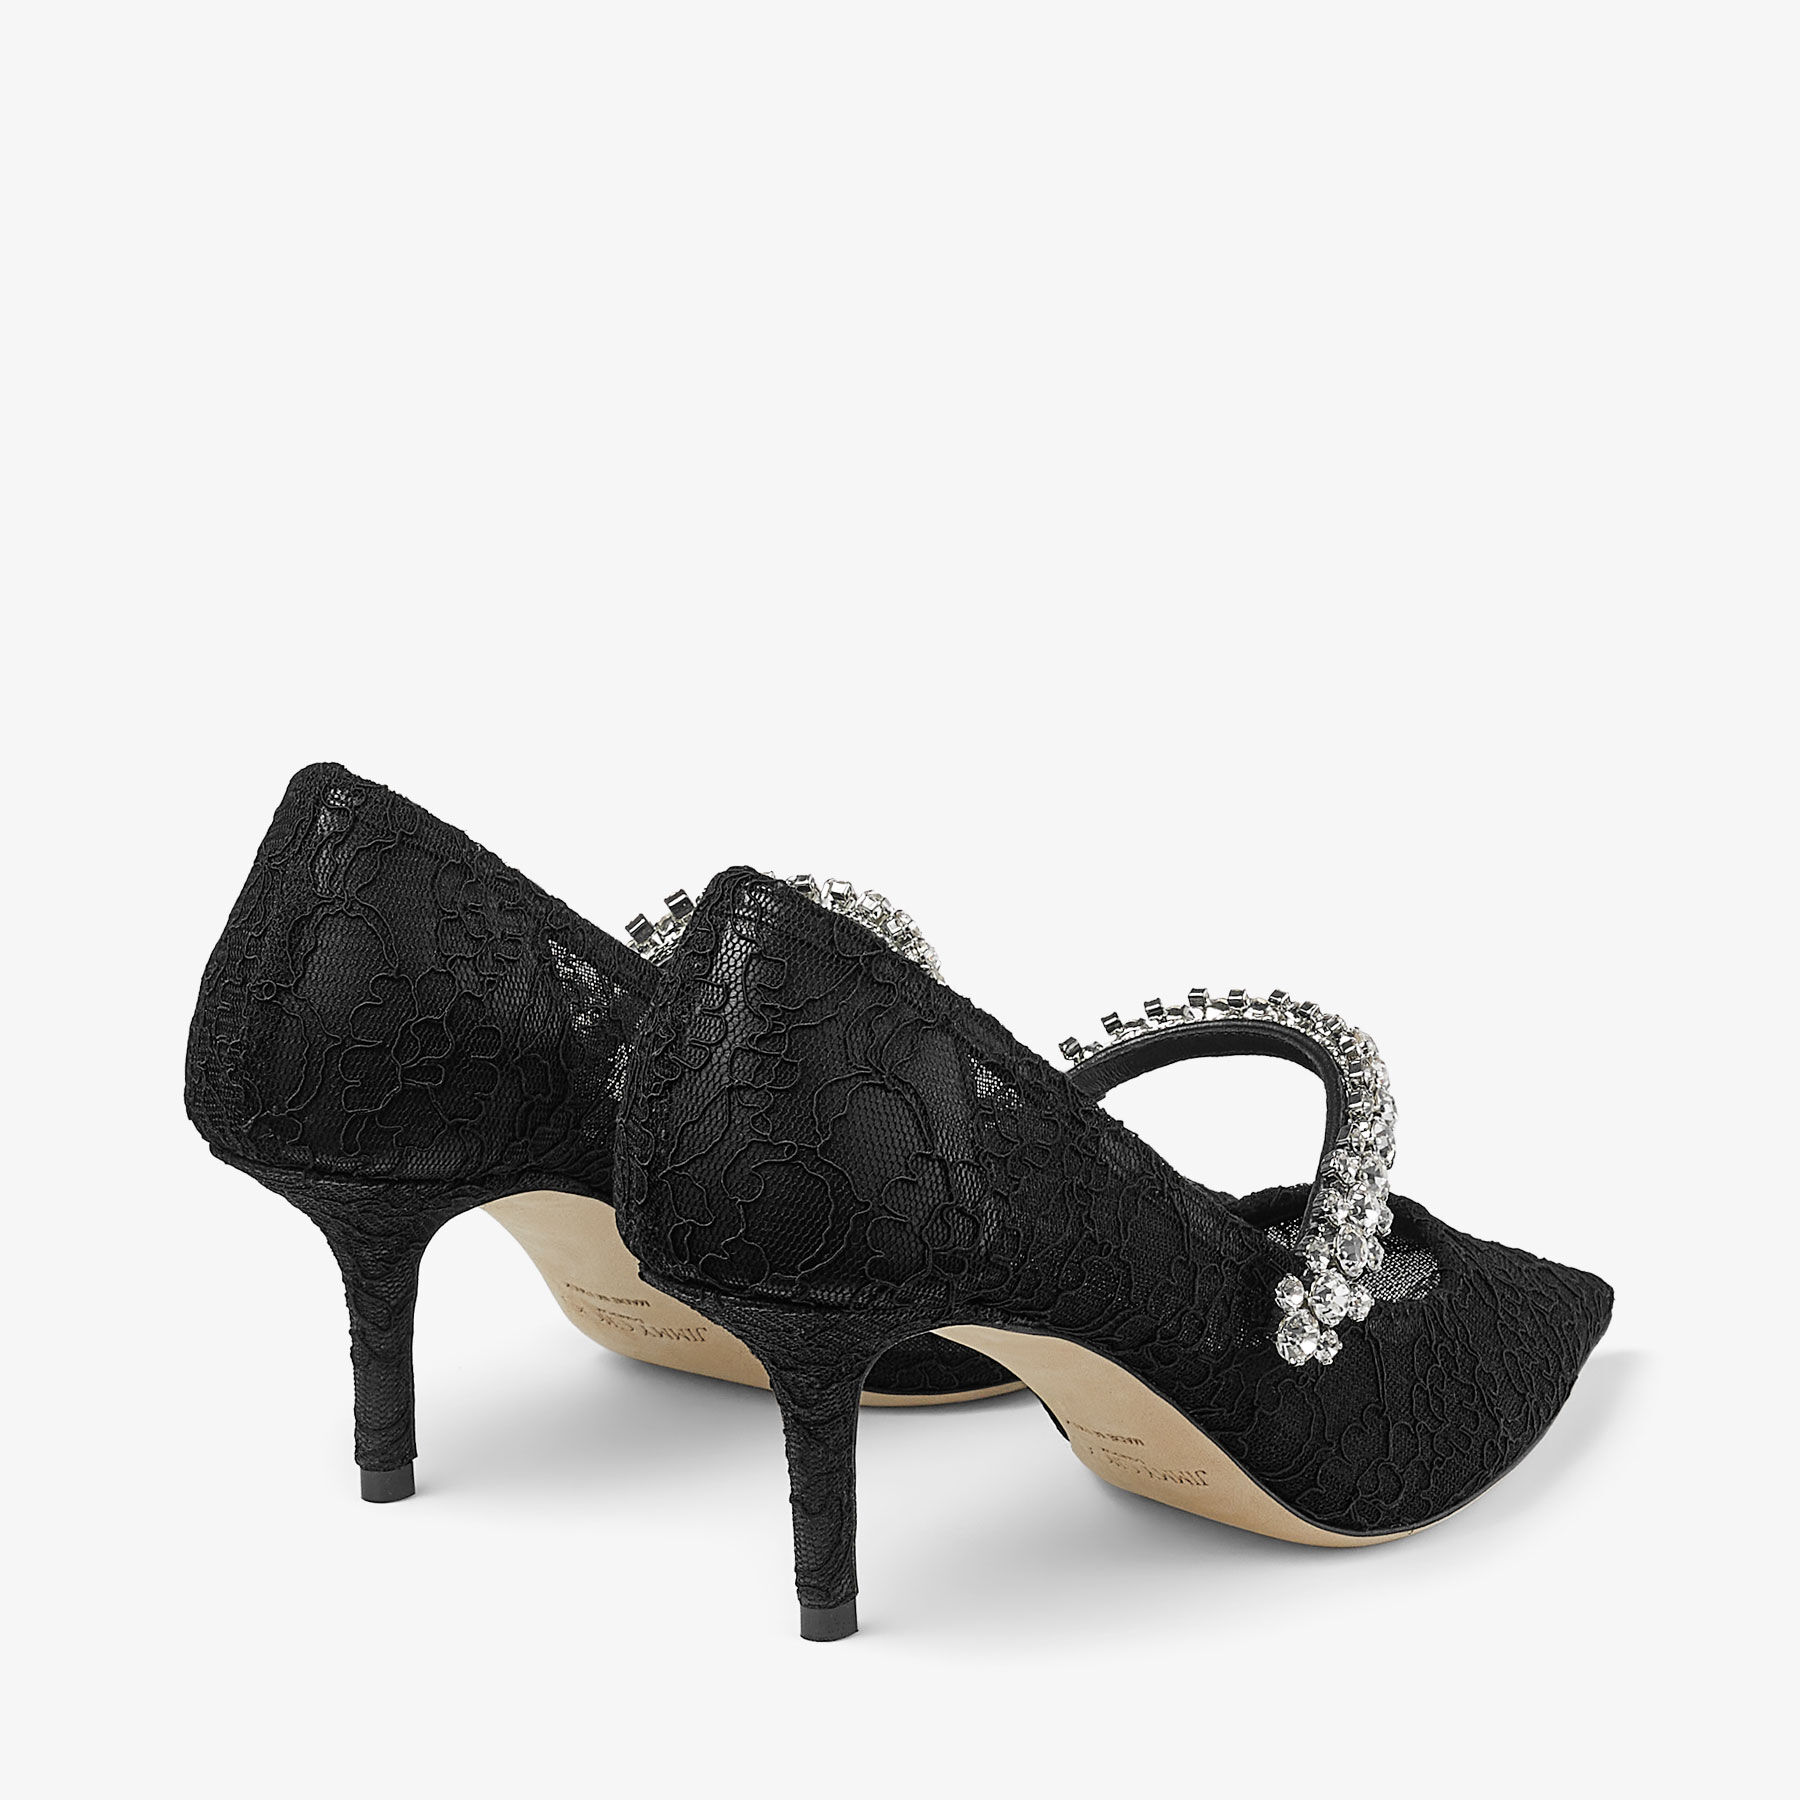 Bing Pump 65 | Black Lace Pumps with crystals | JIMMY CHOO